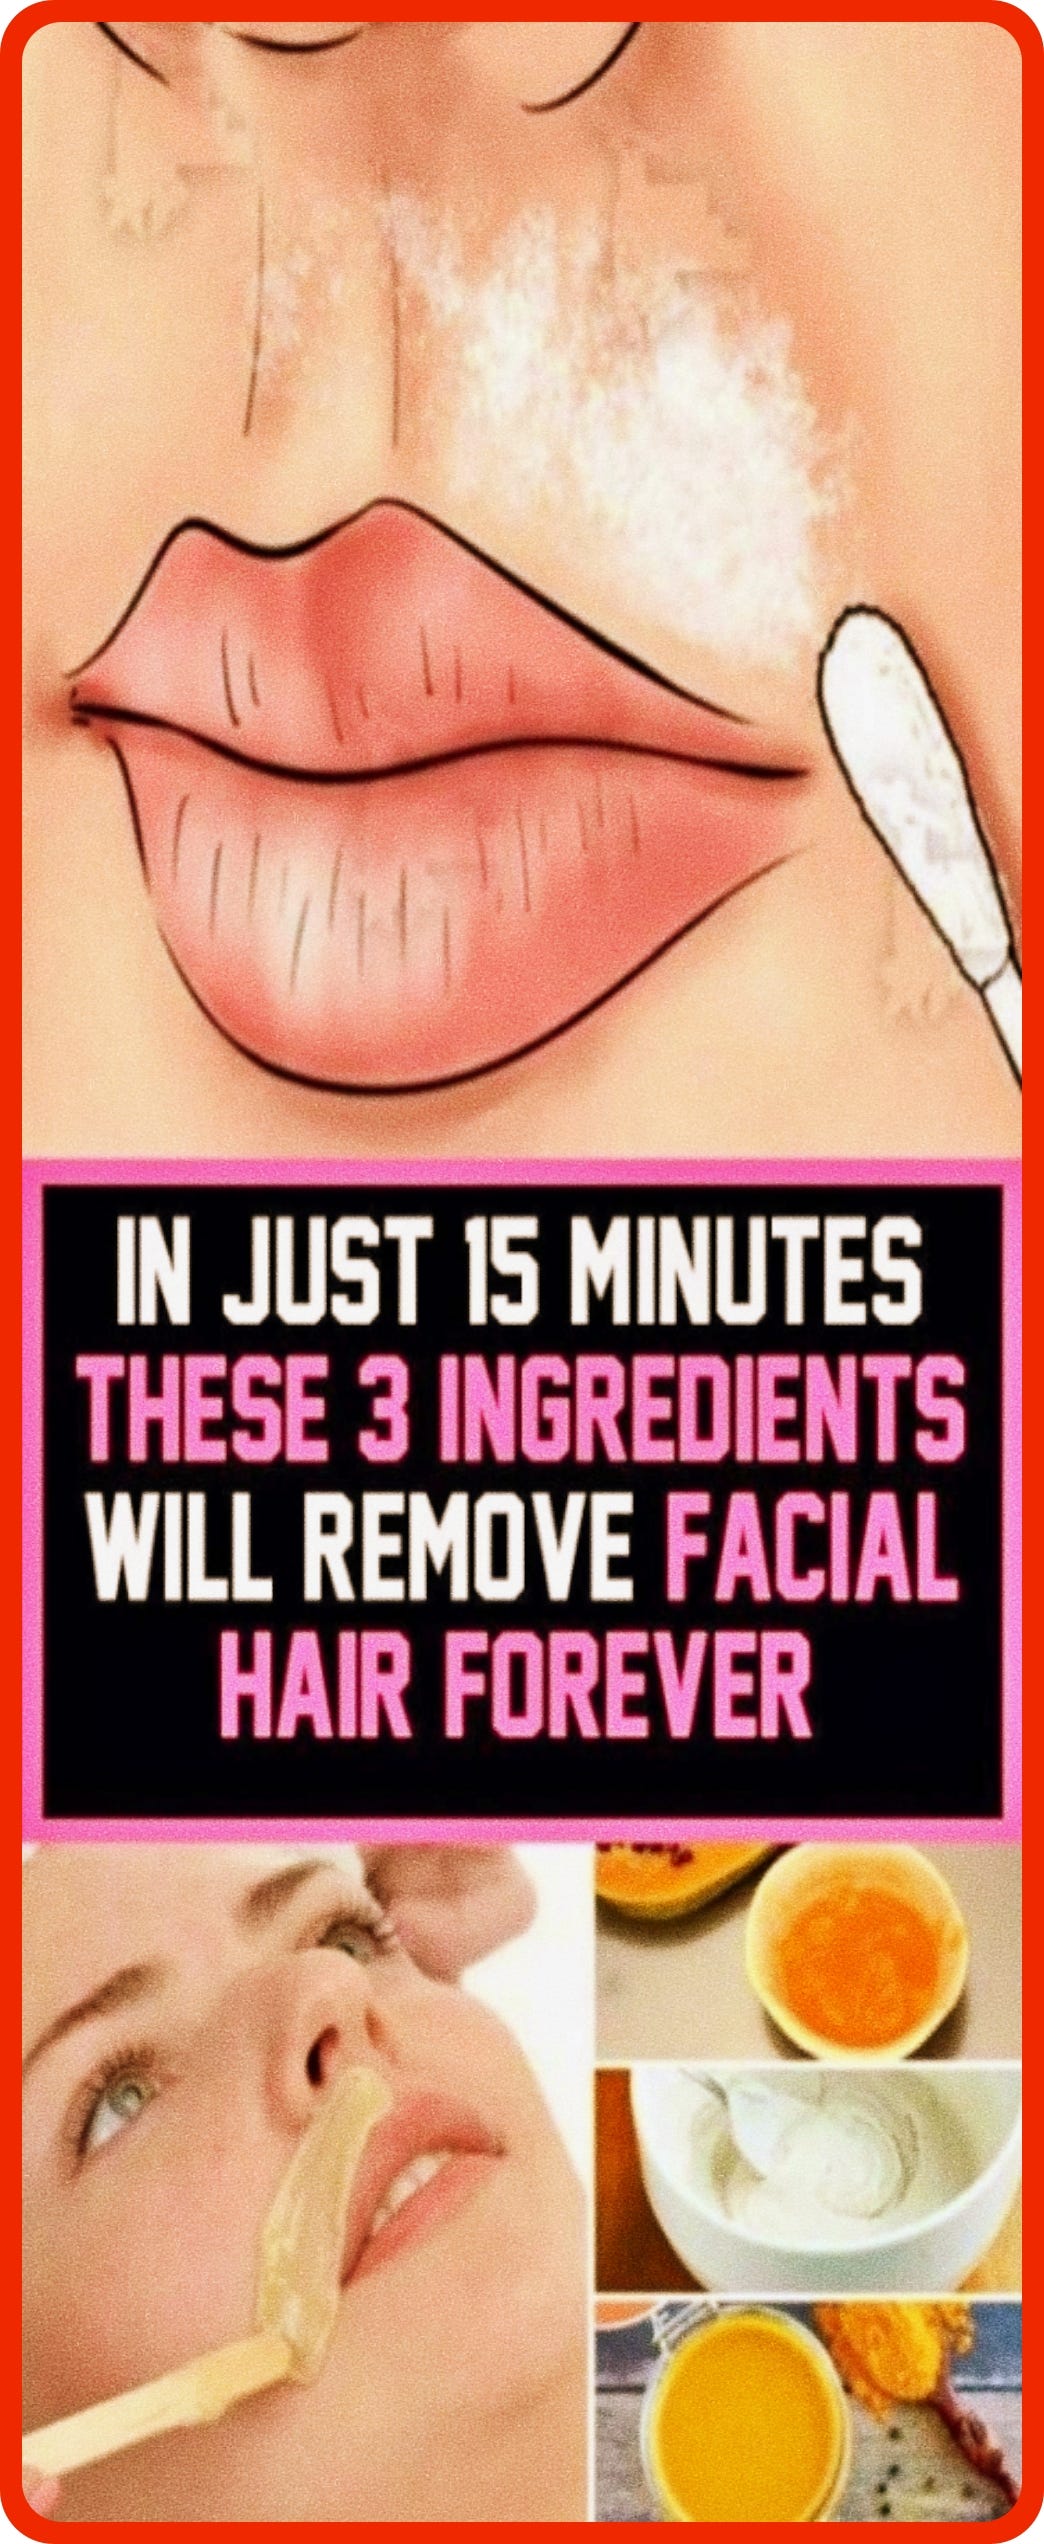 Ladies Read This To Learn How To Get Rid Of Facial Hair Naturally At ...